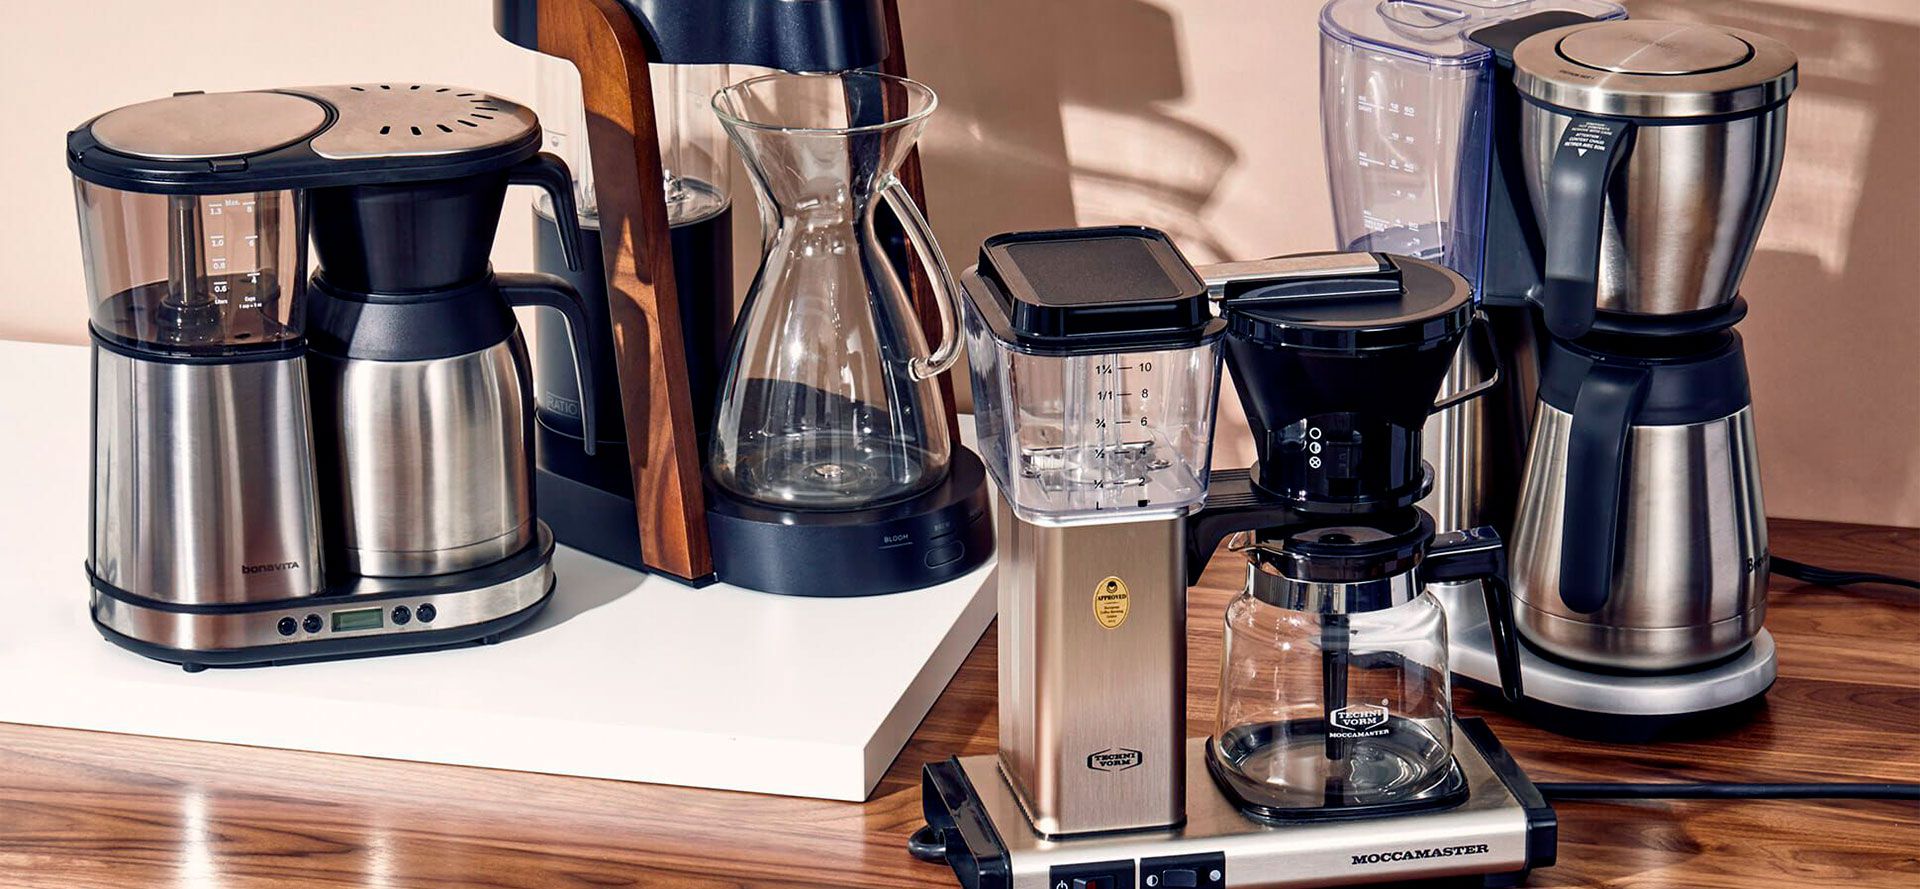 Small Coffee Makers For Home.